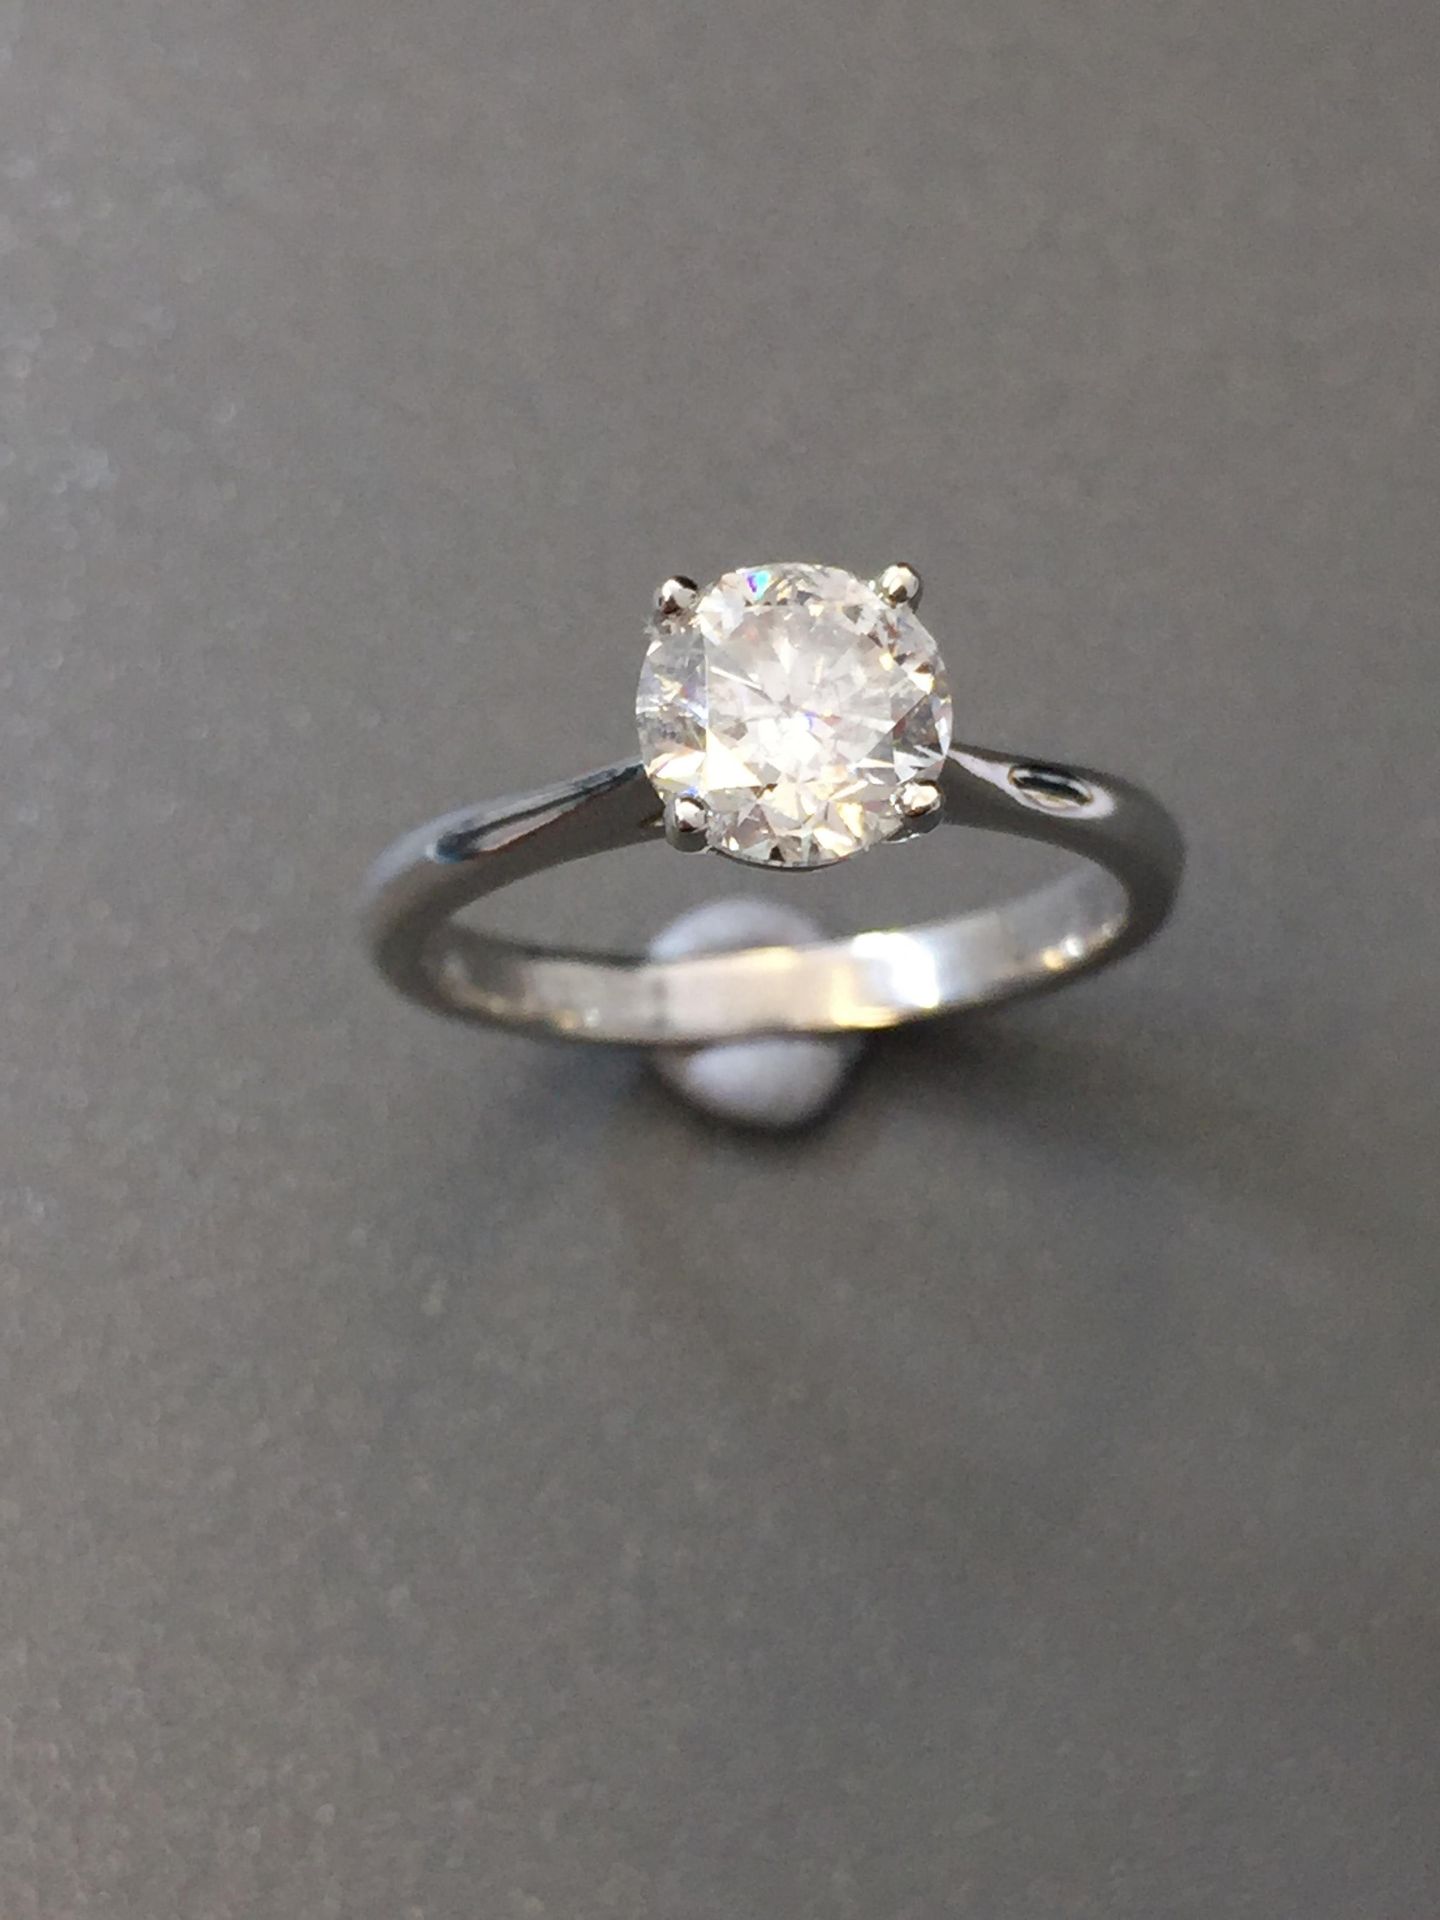 1.01ct diamond solitaire ring set in 18ct white gold.G colour diamond Internally flawless natural